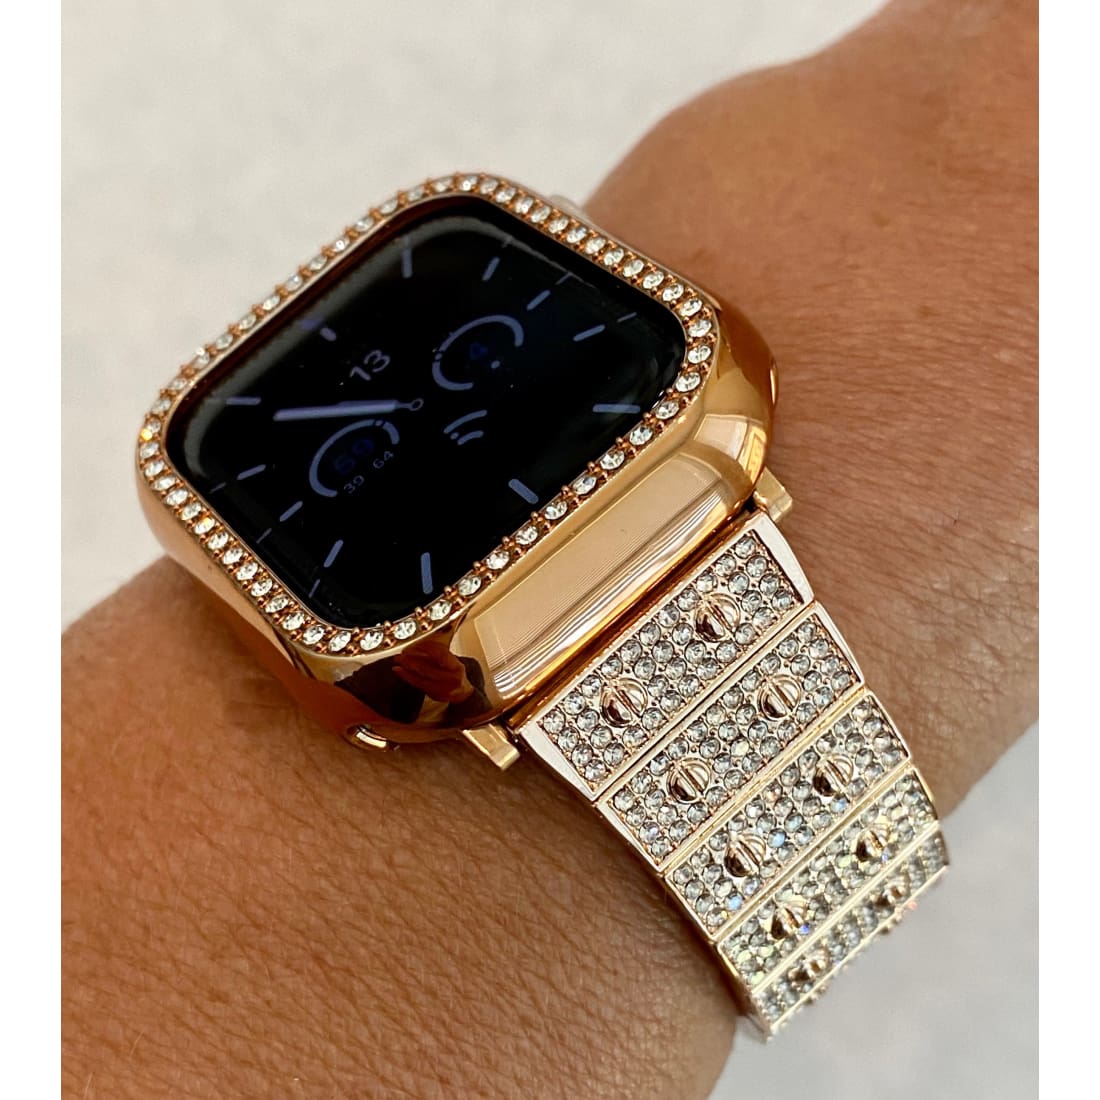 IWATCH BAND  I Will Bling